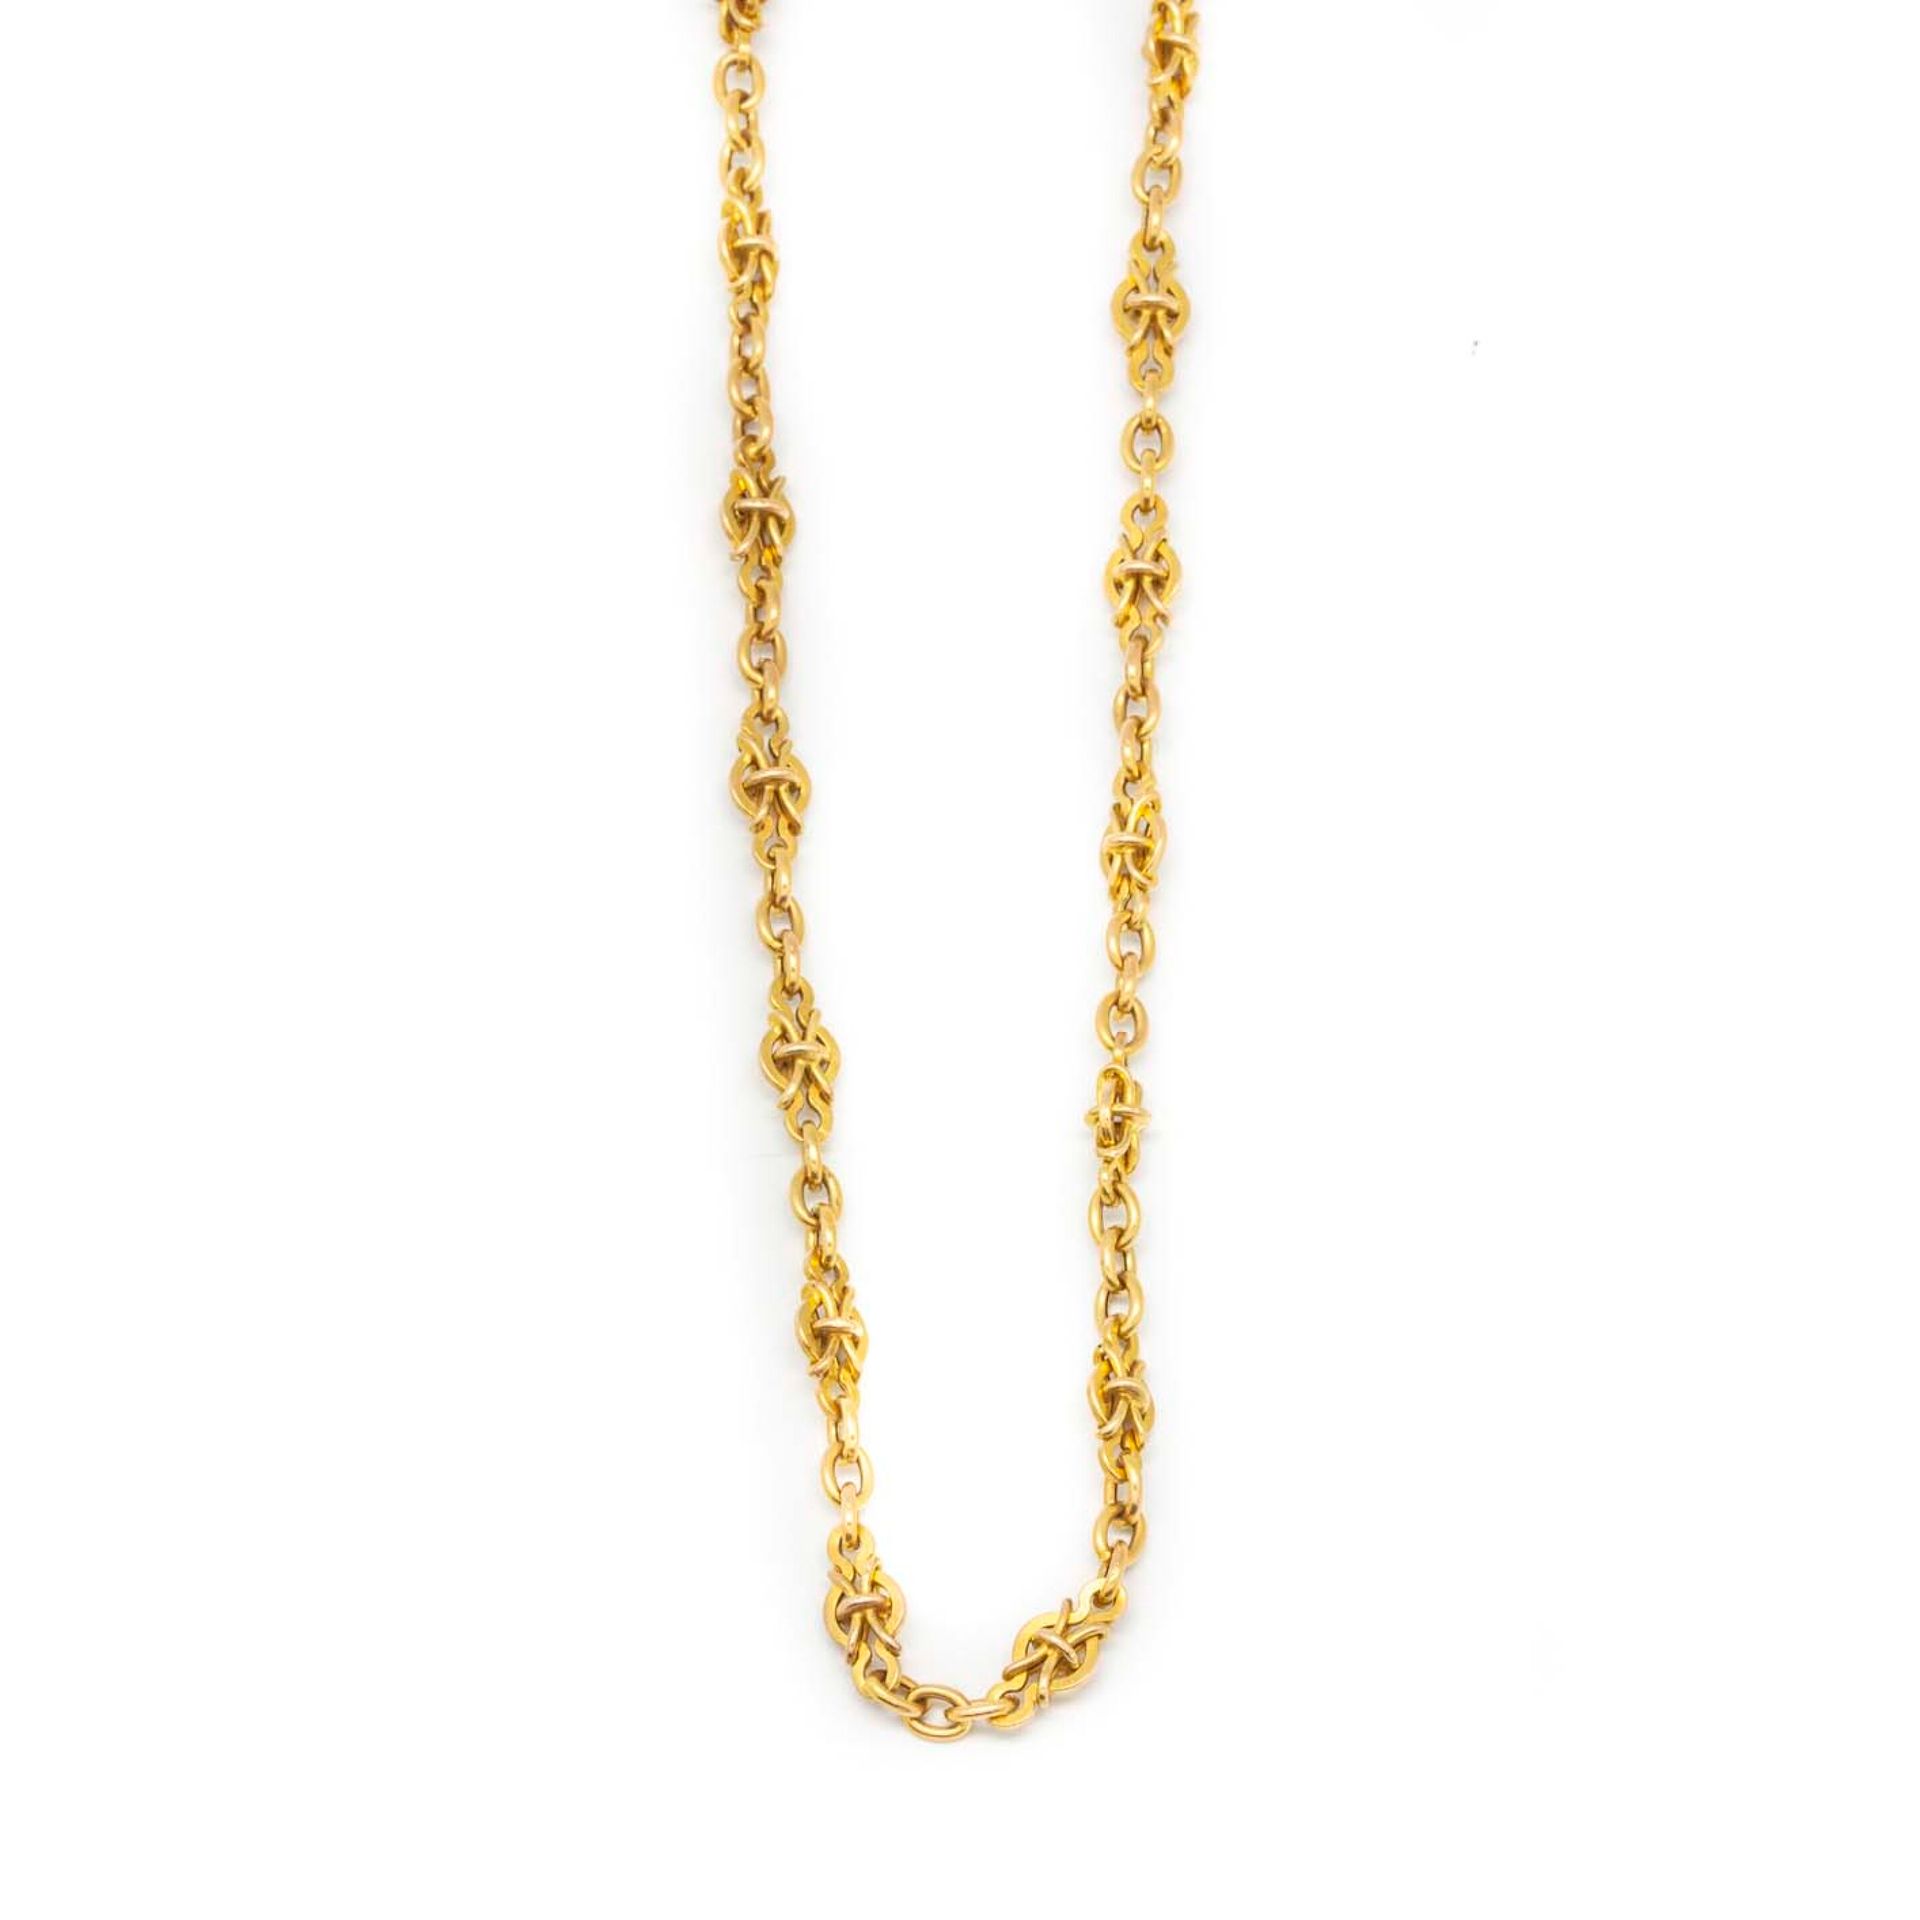 Null Yellow gold chain

Weight : 6,8 g.